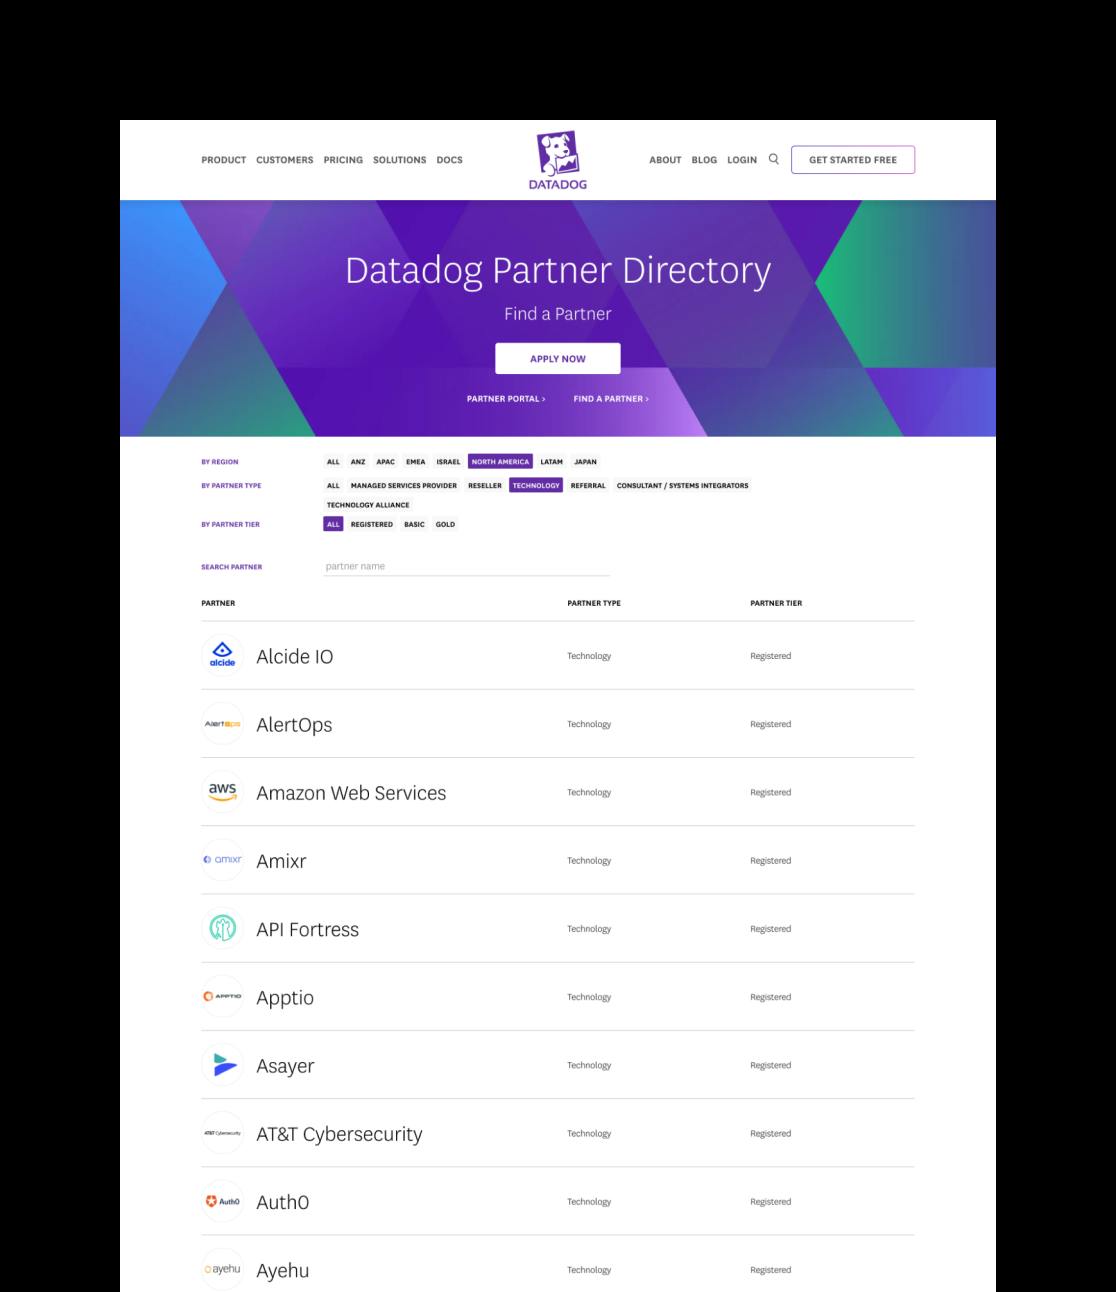 A screencapture of the Partner Directory webpage on a black background. The background image of the header scetion utilizing the blue, purple and green overlapping hexagons imagery.